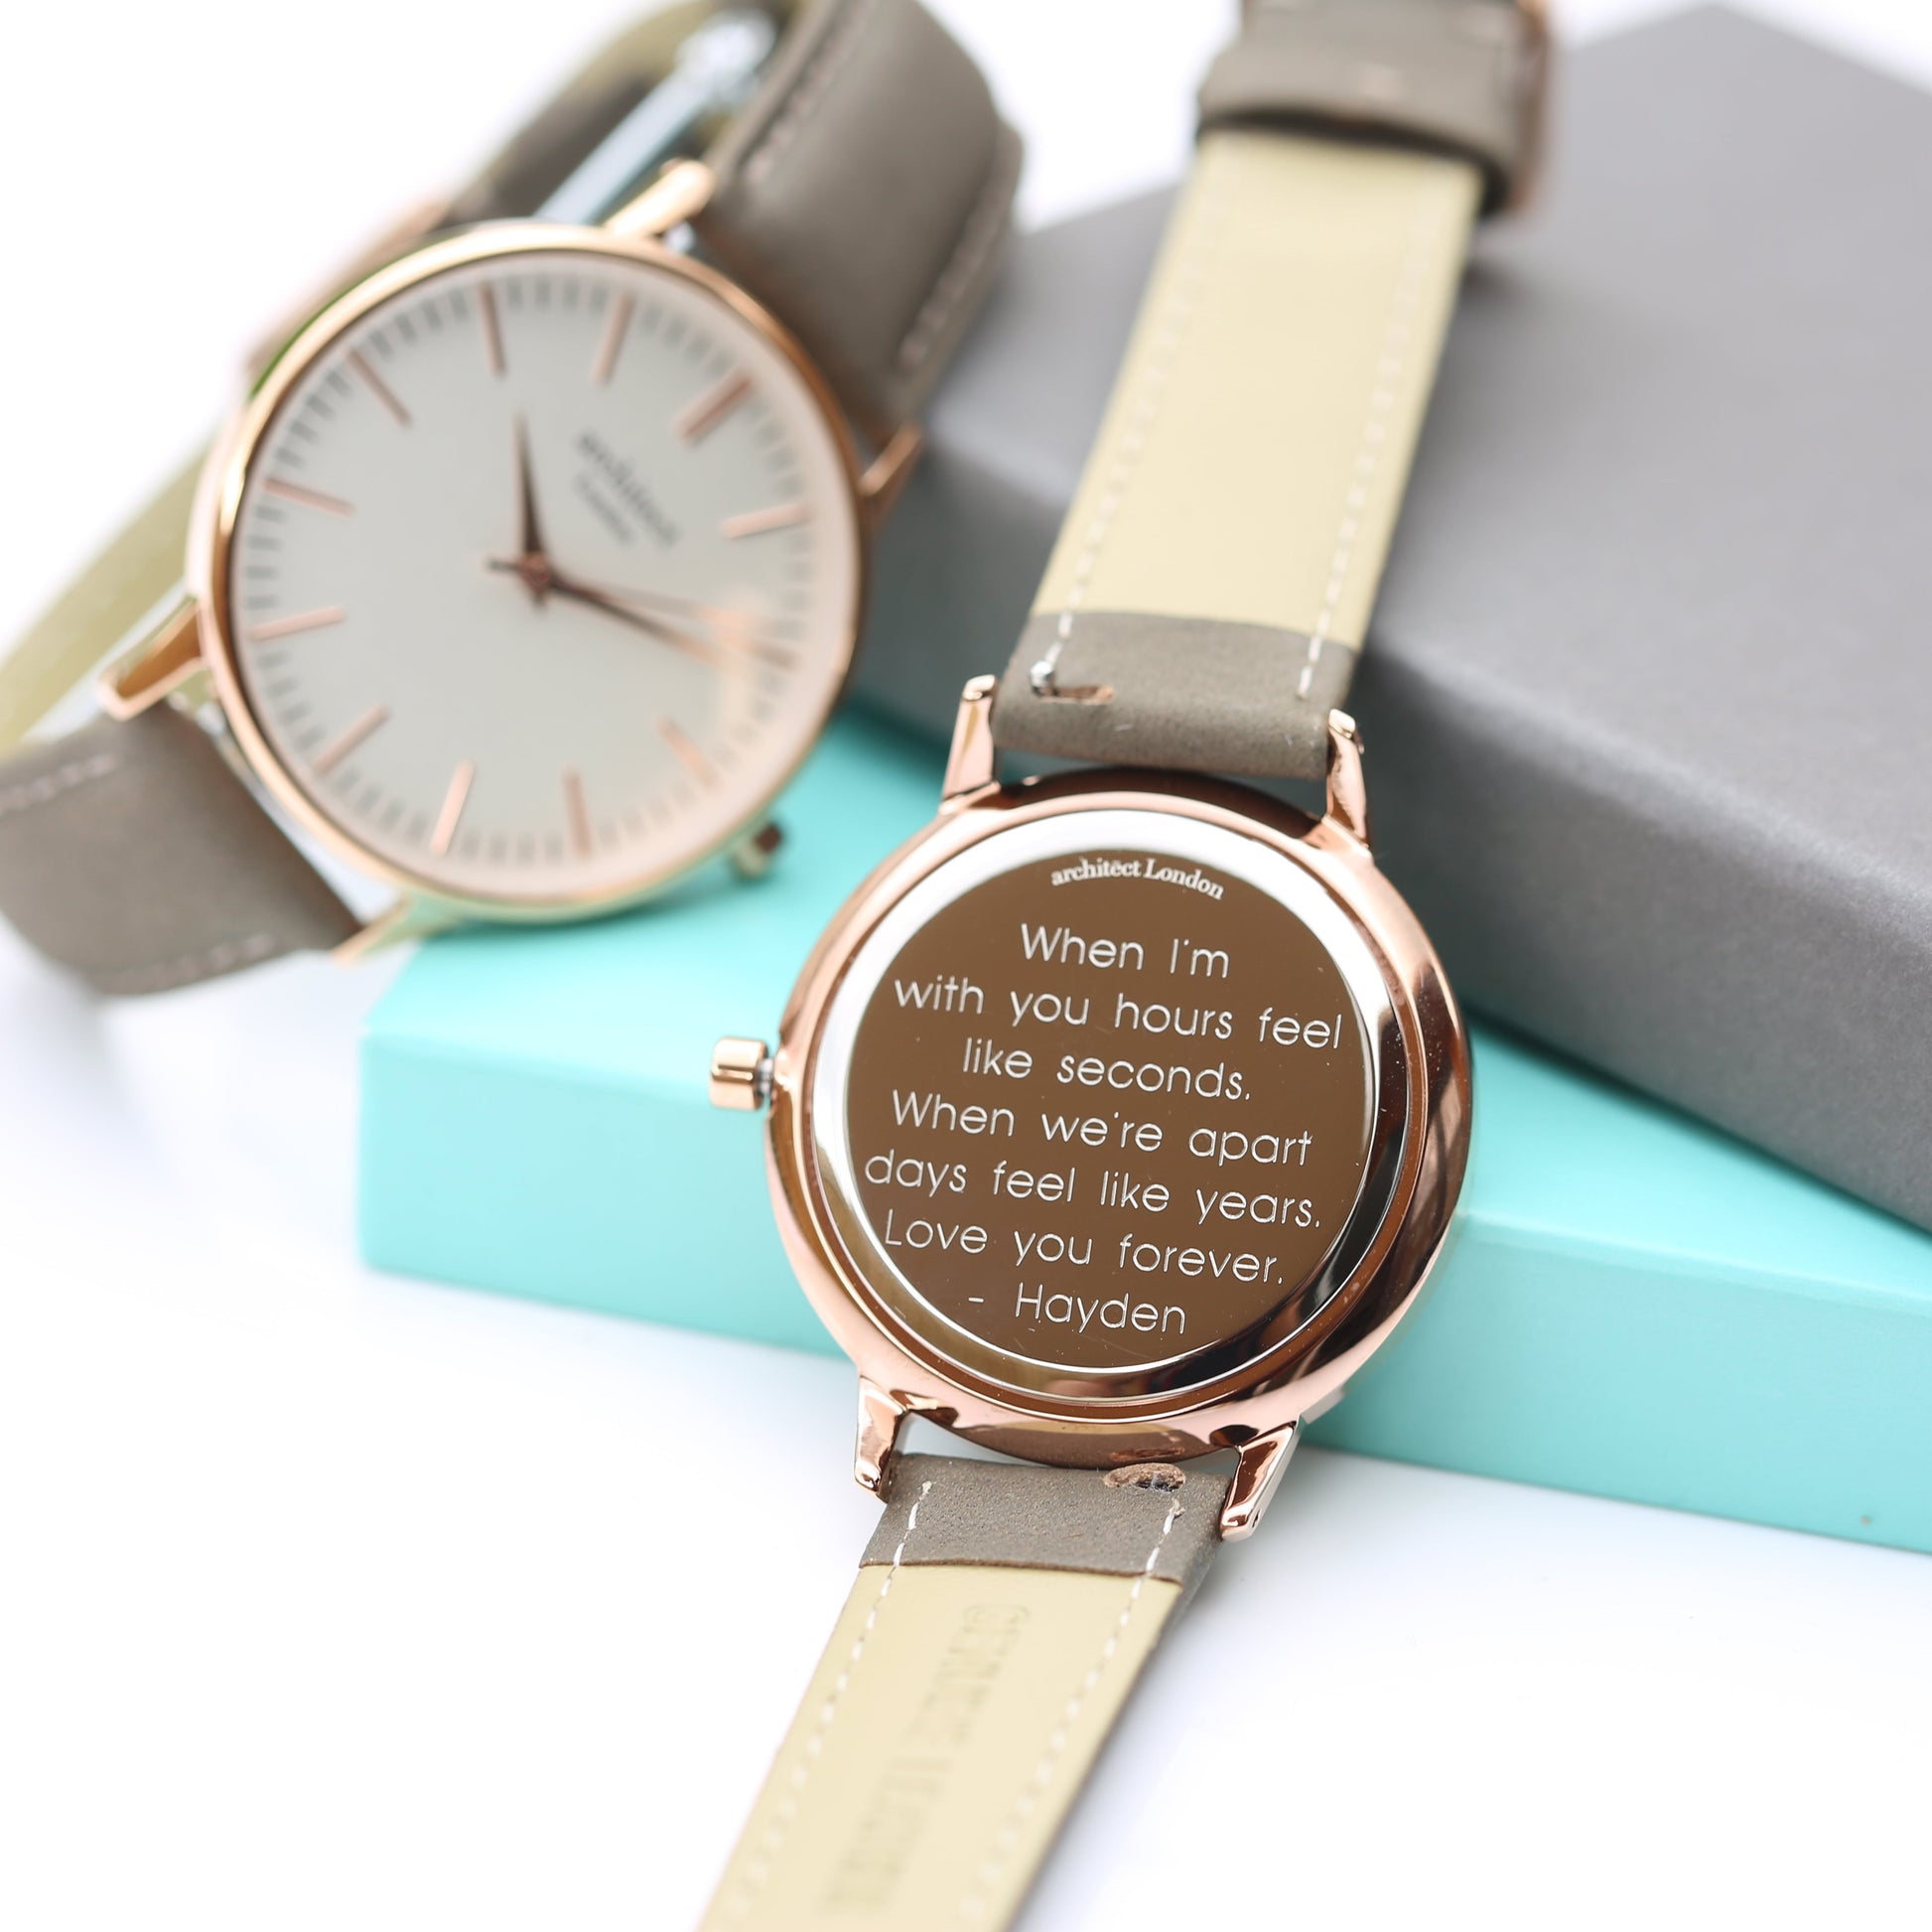 Personalized Ladies' Watches - Women's Engraved Watch In Light Grey 